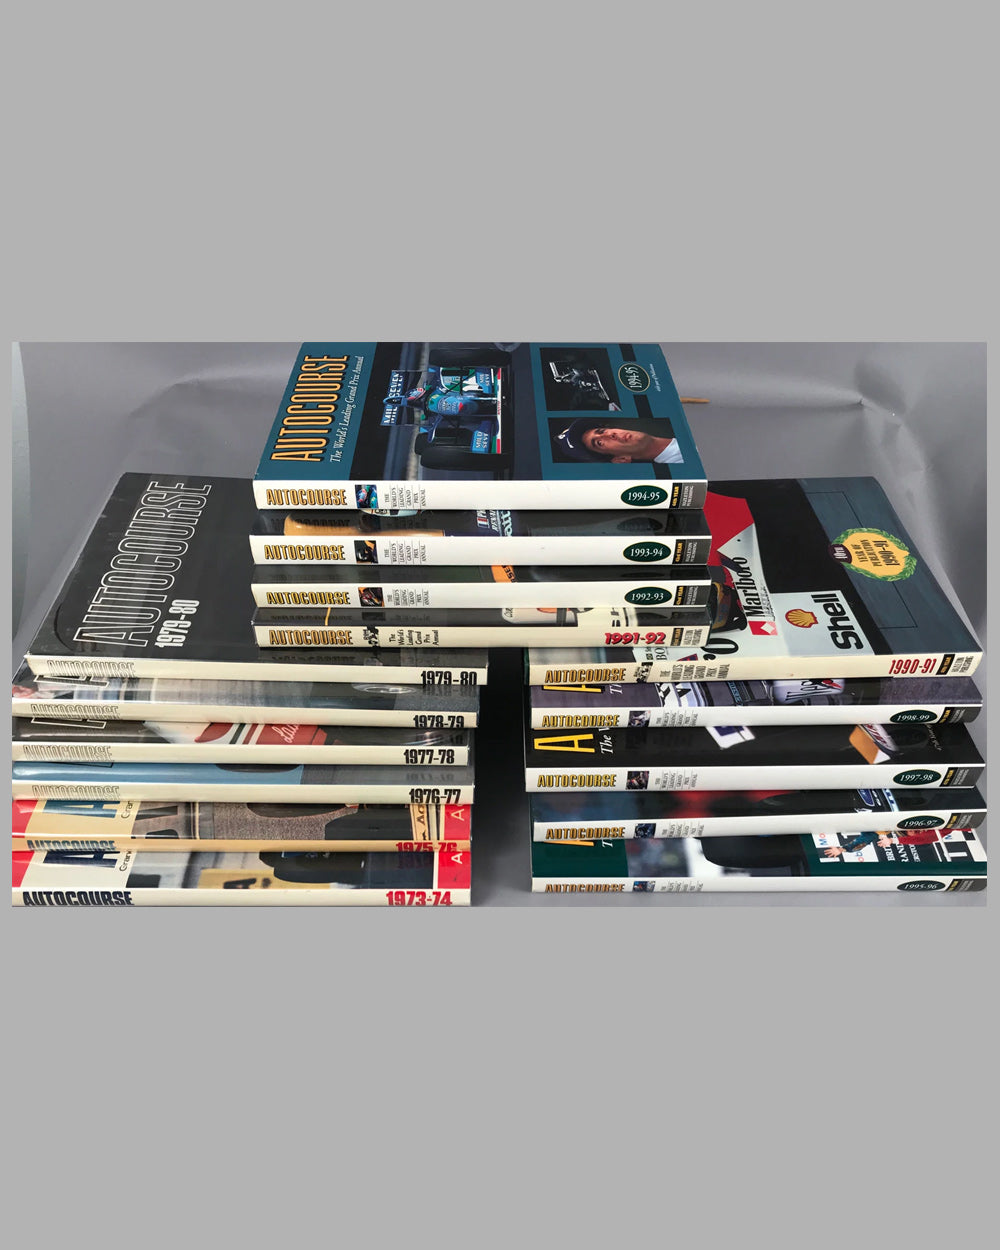 Collection of Autocourse magazines and books from 1953 to 1998